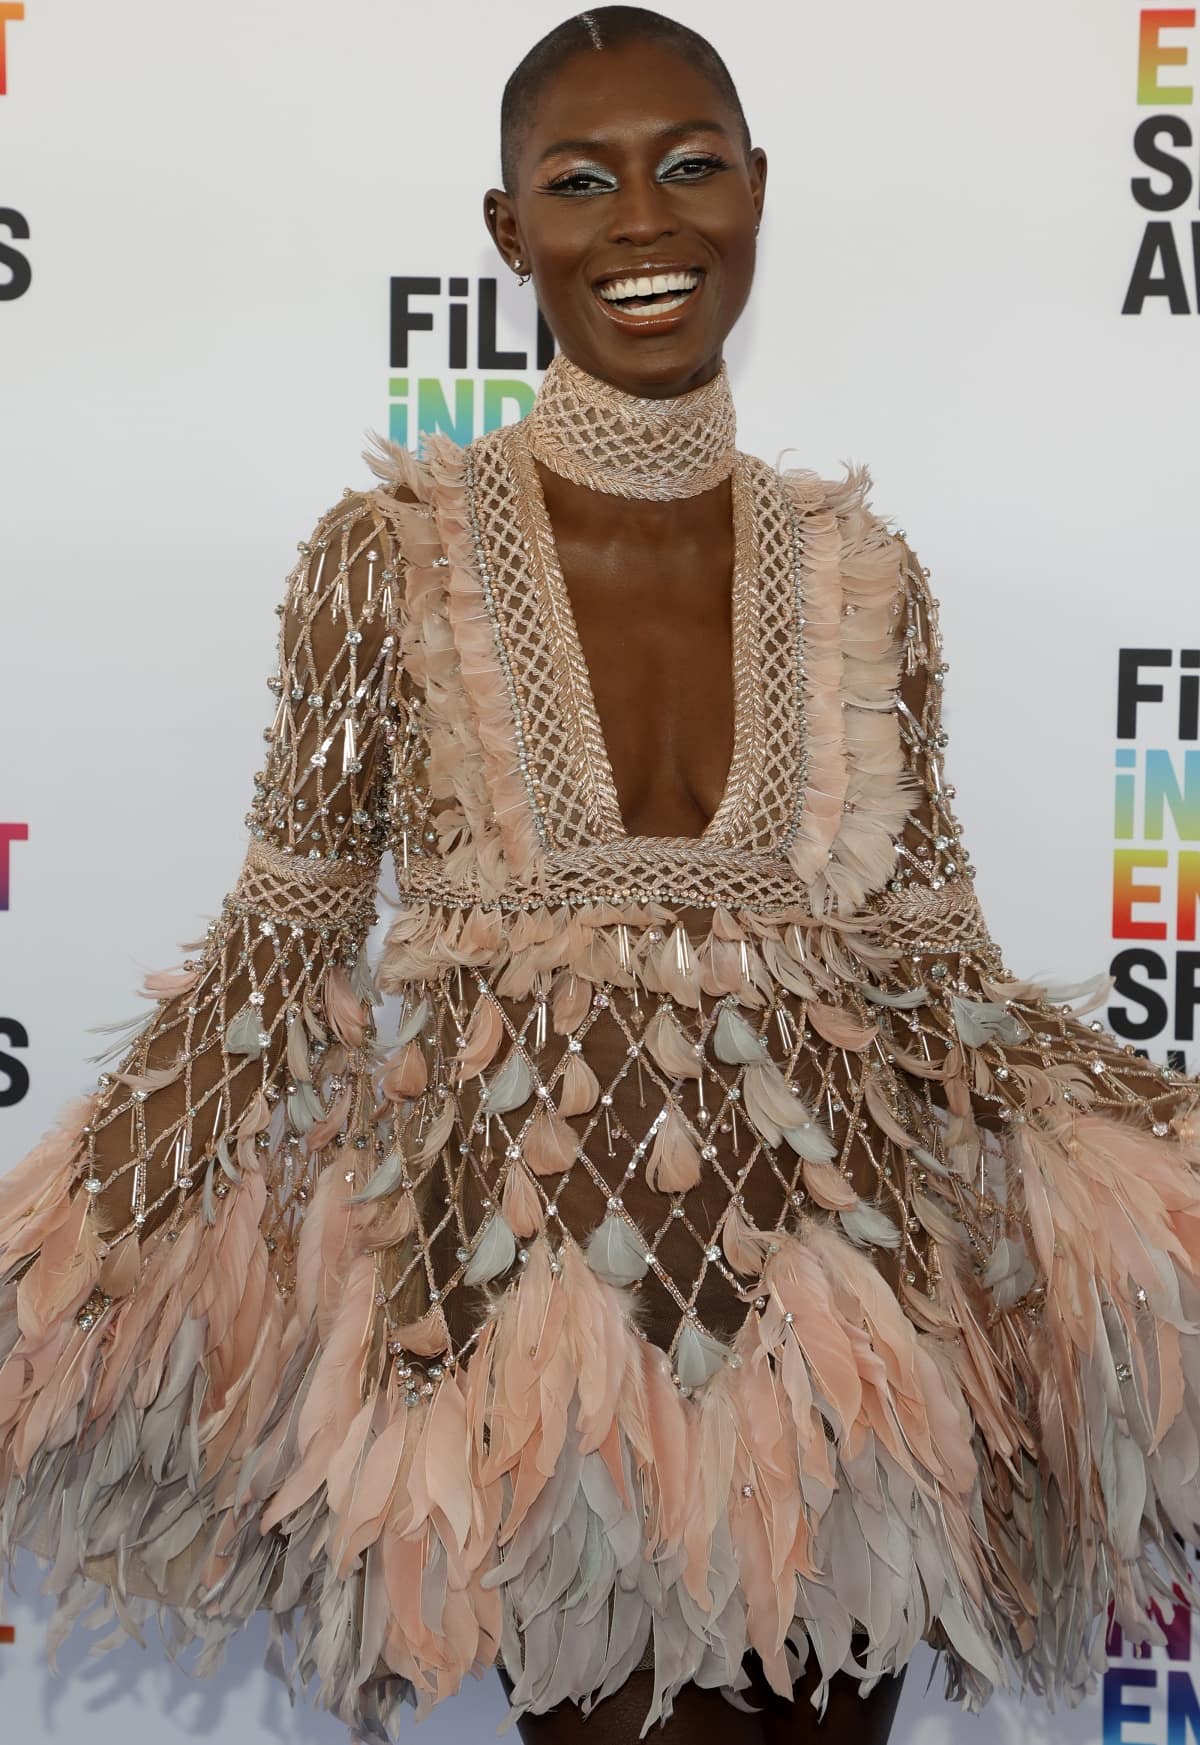 Jodie Turner-Smith wearing a gorgeous Elie Saab couture gown that’s all about theatrical splendor